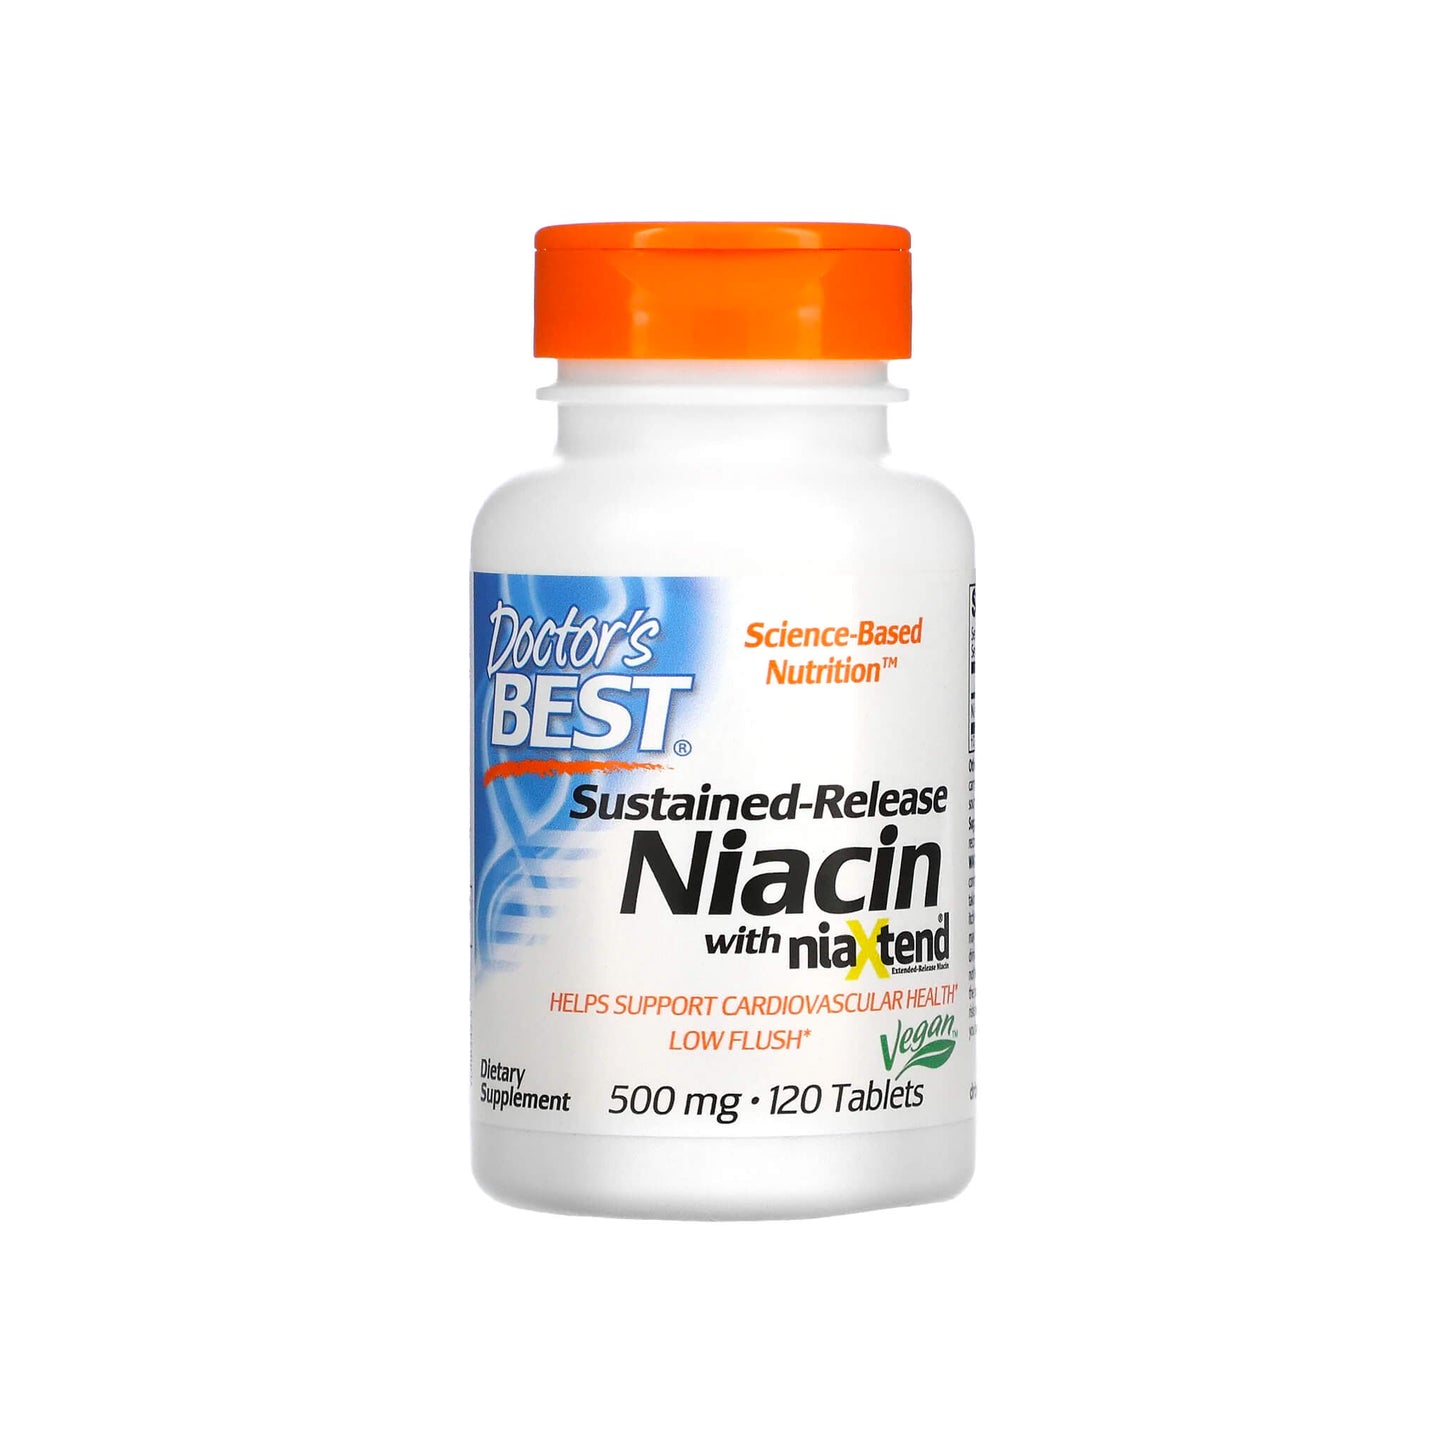 Doctor's Best, Sustained-Release Niacin with niaXtend, 500 mg - 120 Tablets